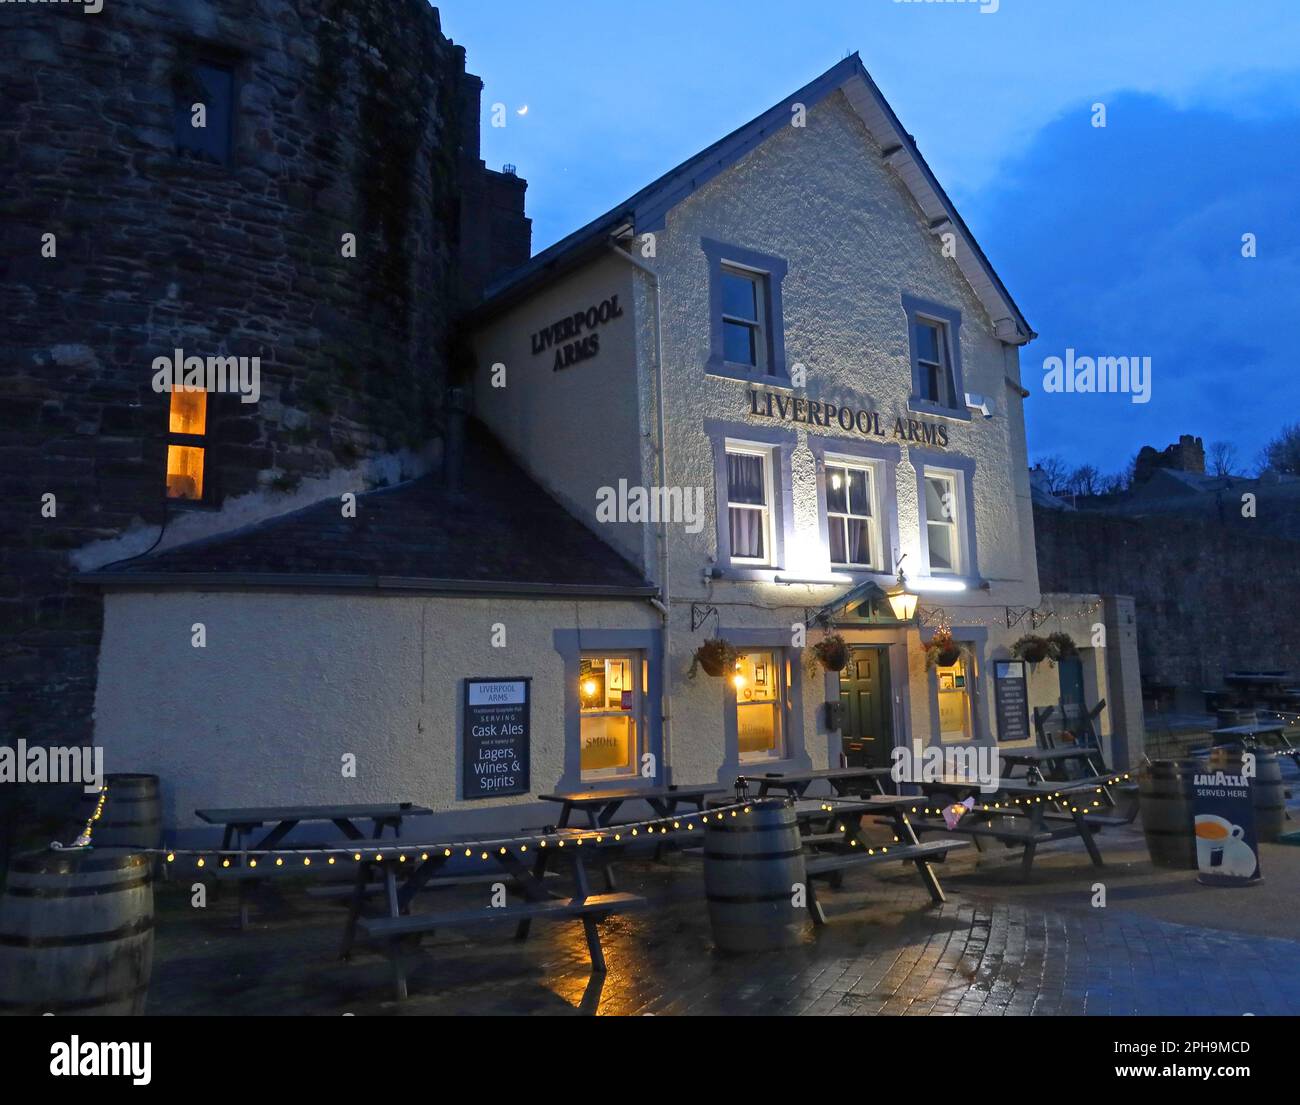 Pub Haunted - The Liverpool Arms, Lower Gate Street, Conwy, Galles del Nord, Regno Unito, LL32 8BE Foto Stock